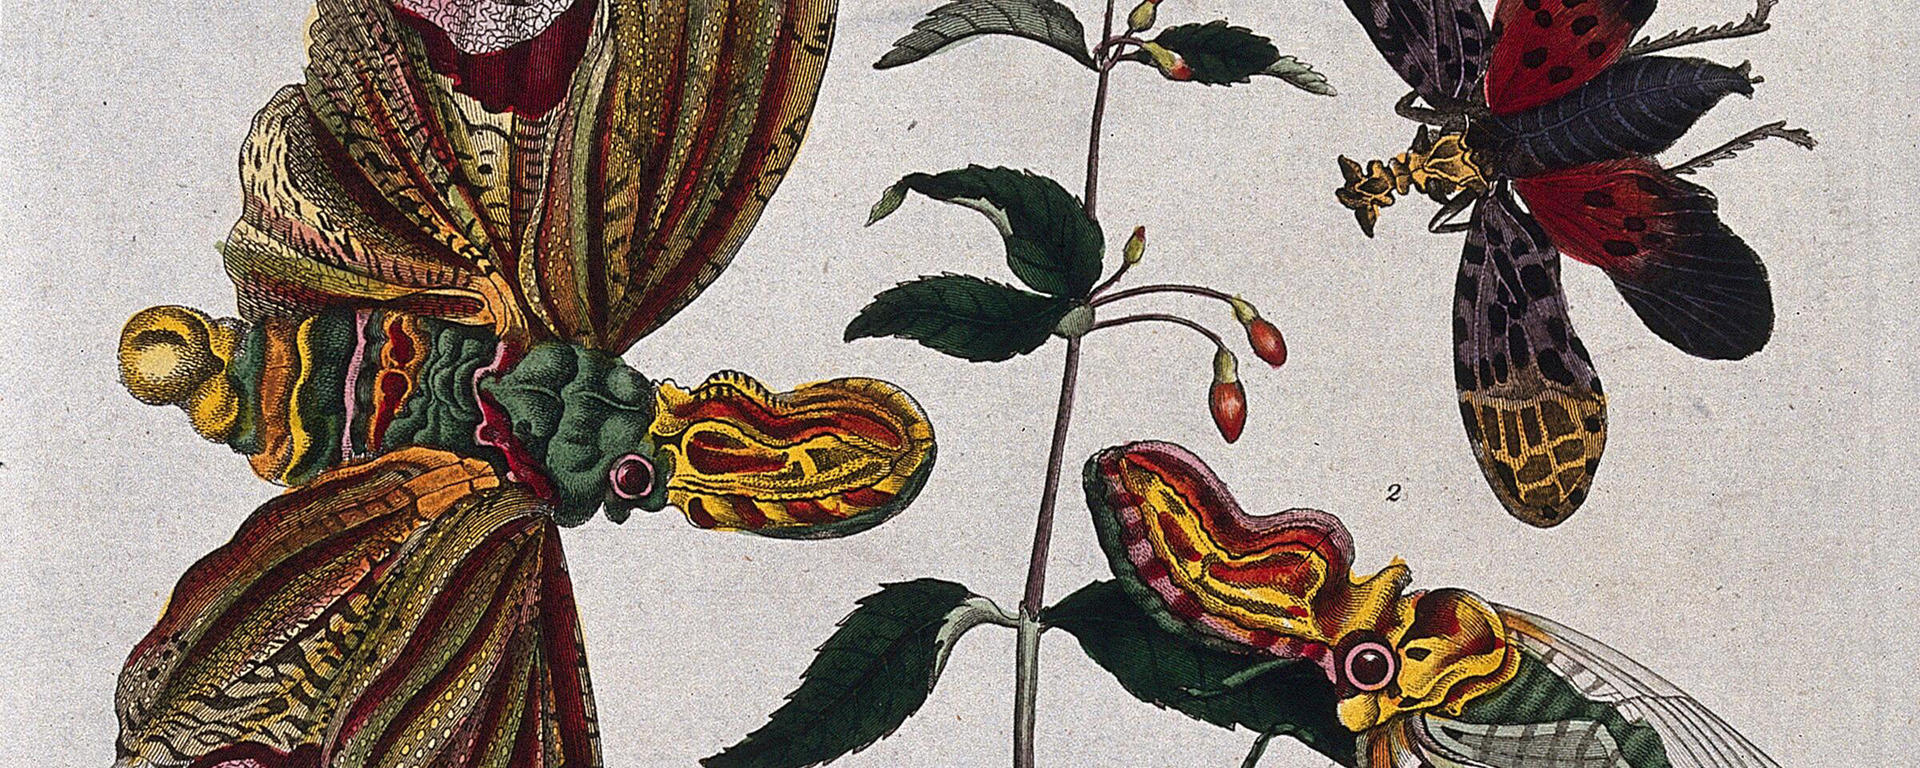 Early manuscript illustration of fuscia plant with flying insects